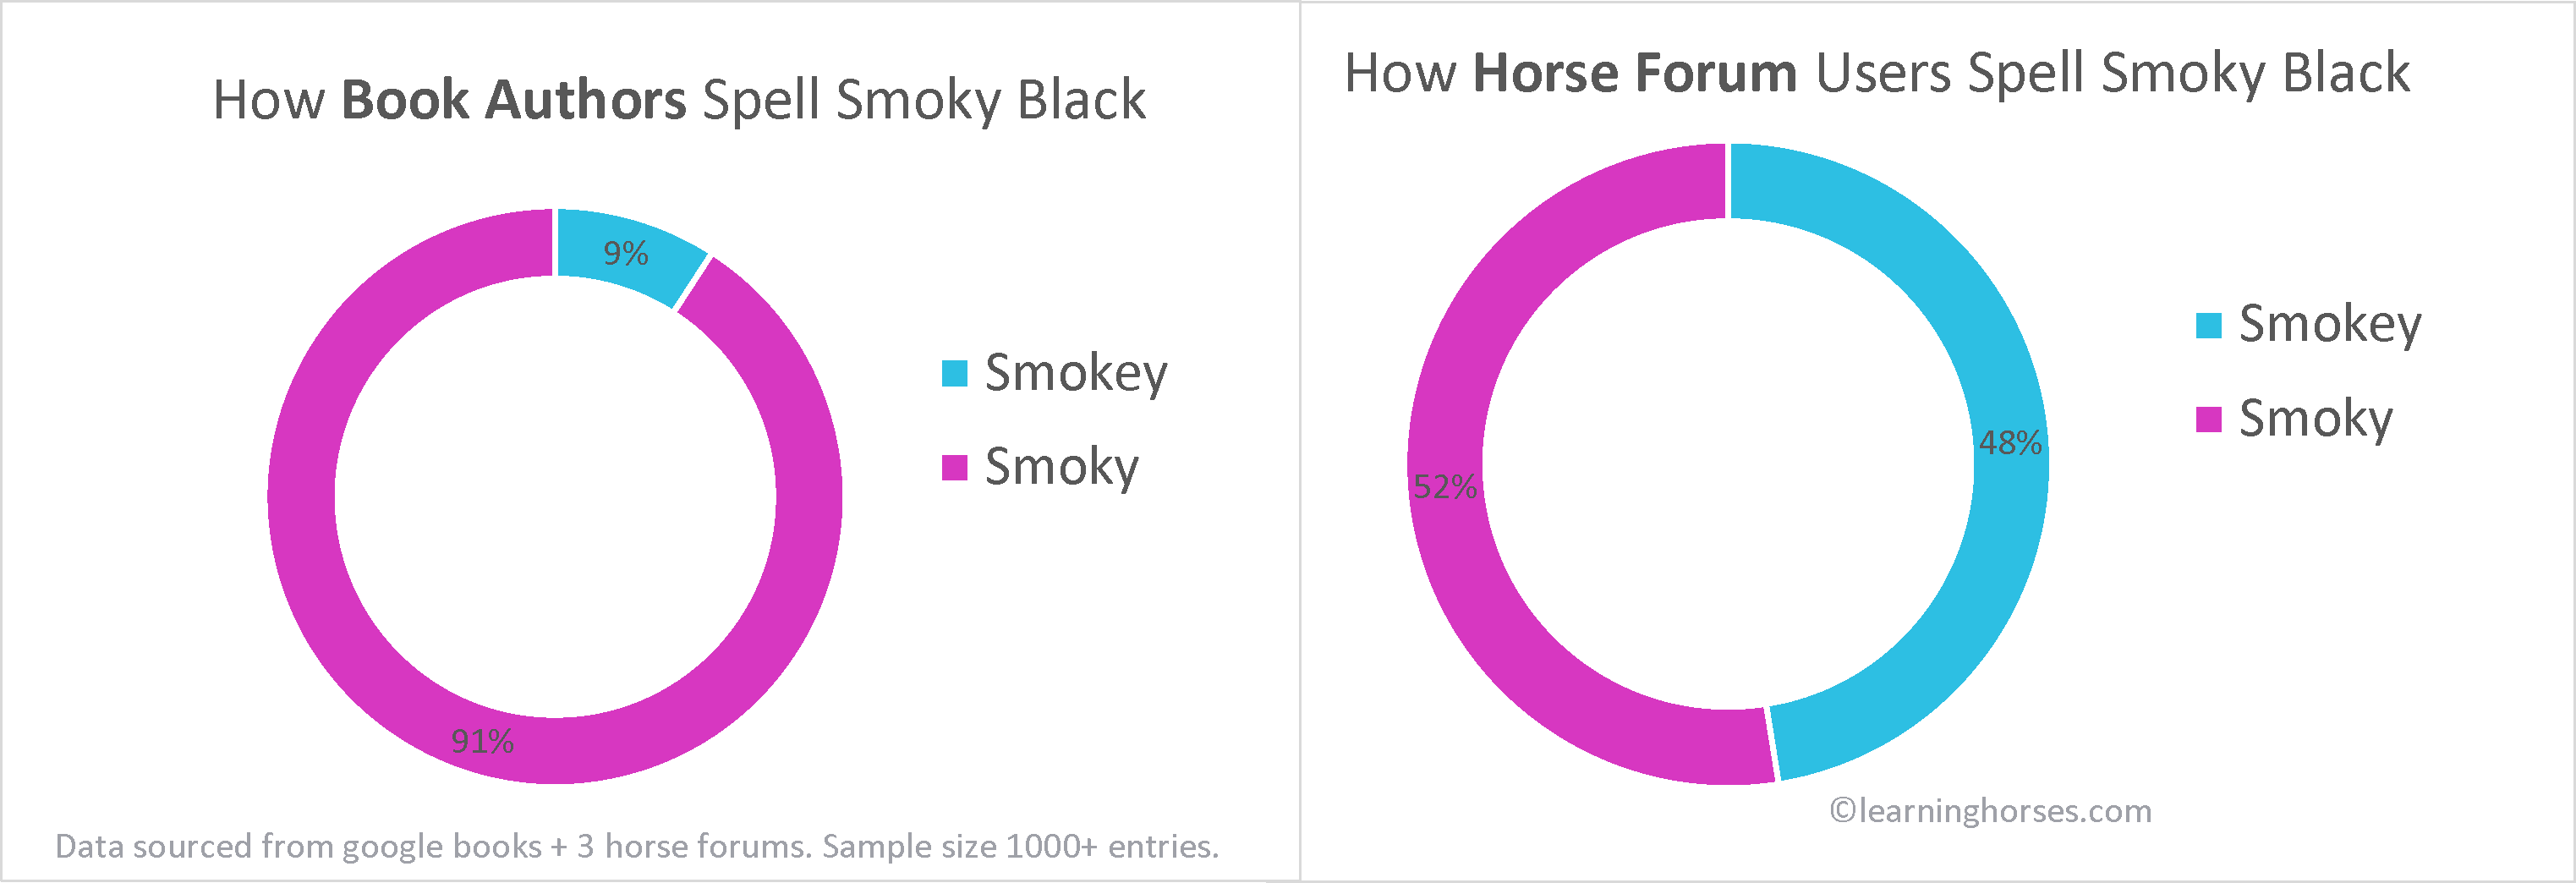 Two side by side donut graphs showing how book authors spell smoky black vs internet use of the spelling variant smokey black.